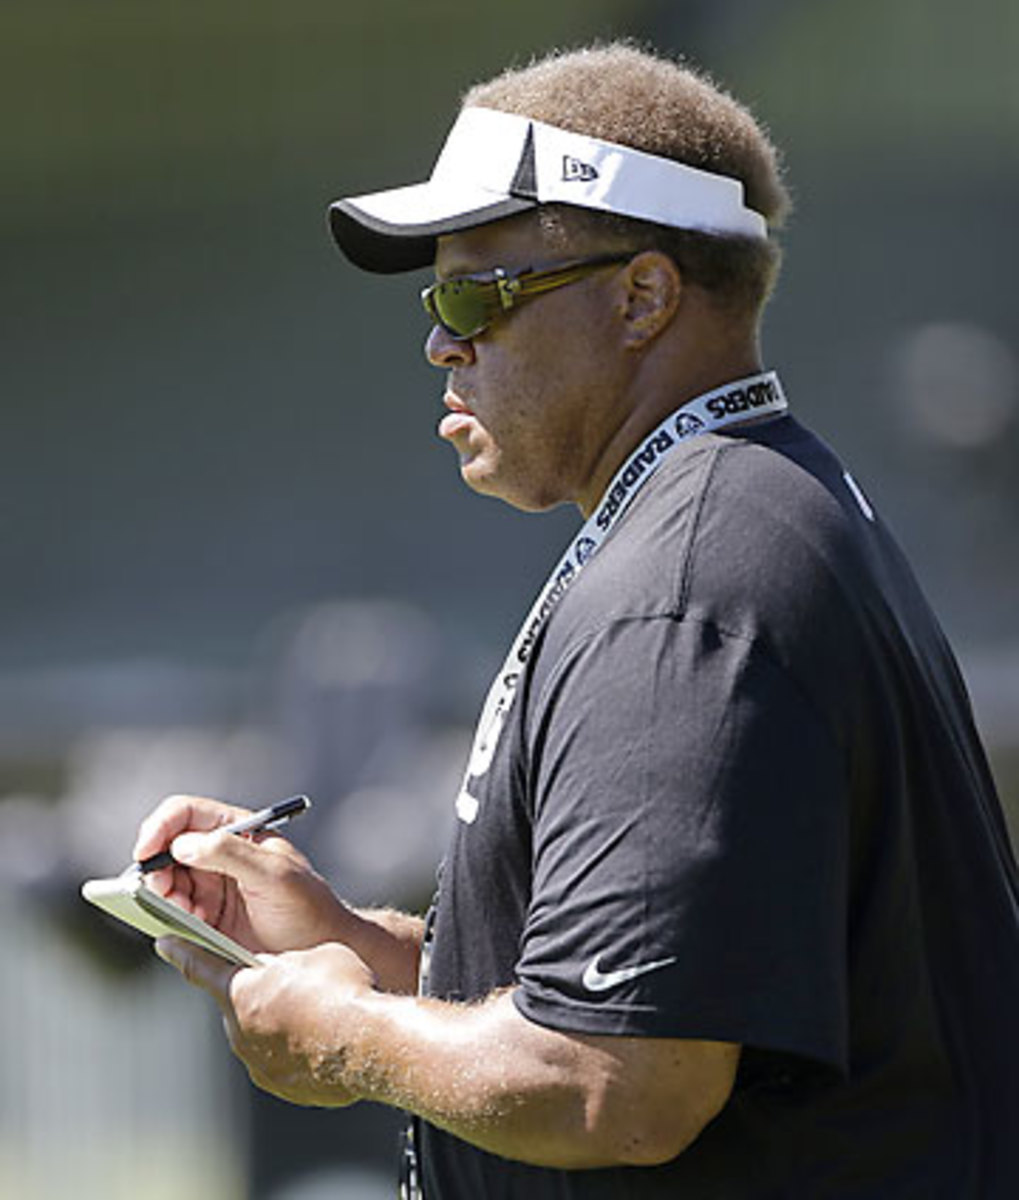 GM Reggie McKenzie may not want to be keeping score this year, but he’ll have a lot of cap space to work with after this season. (Eric Risberg/AP)